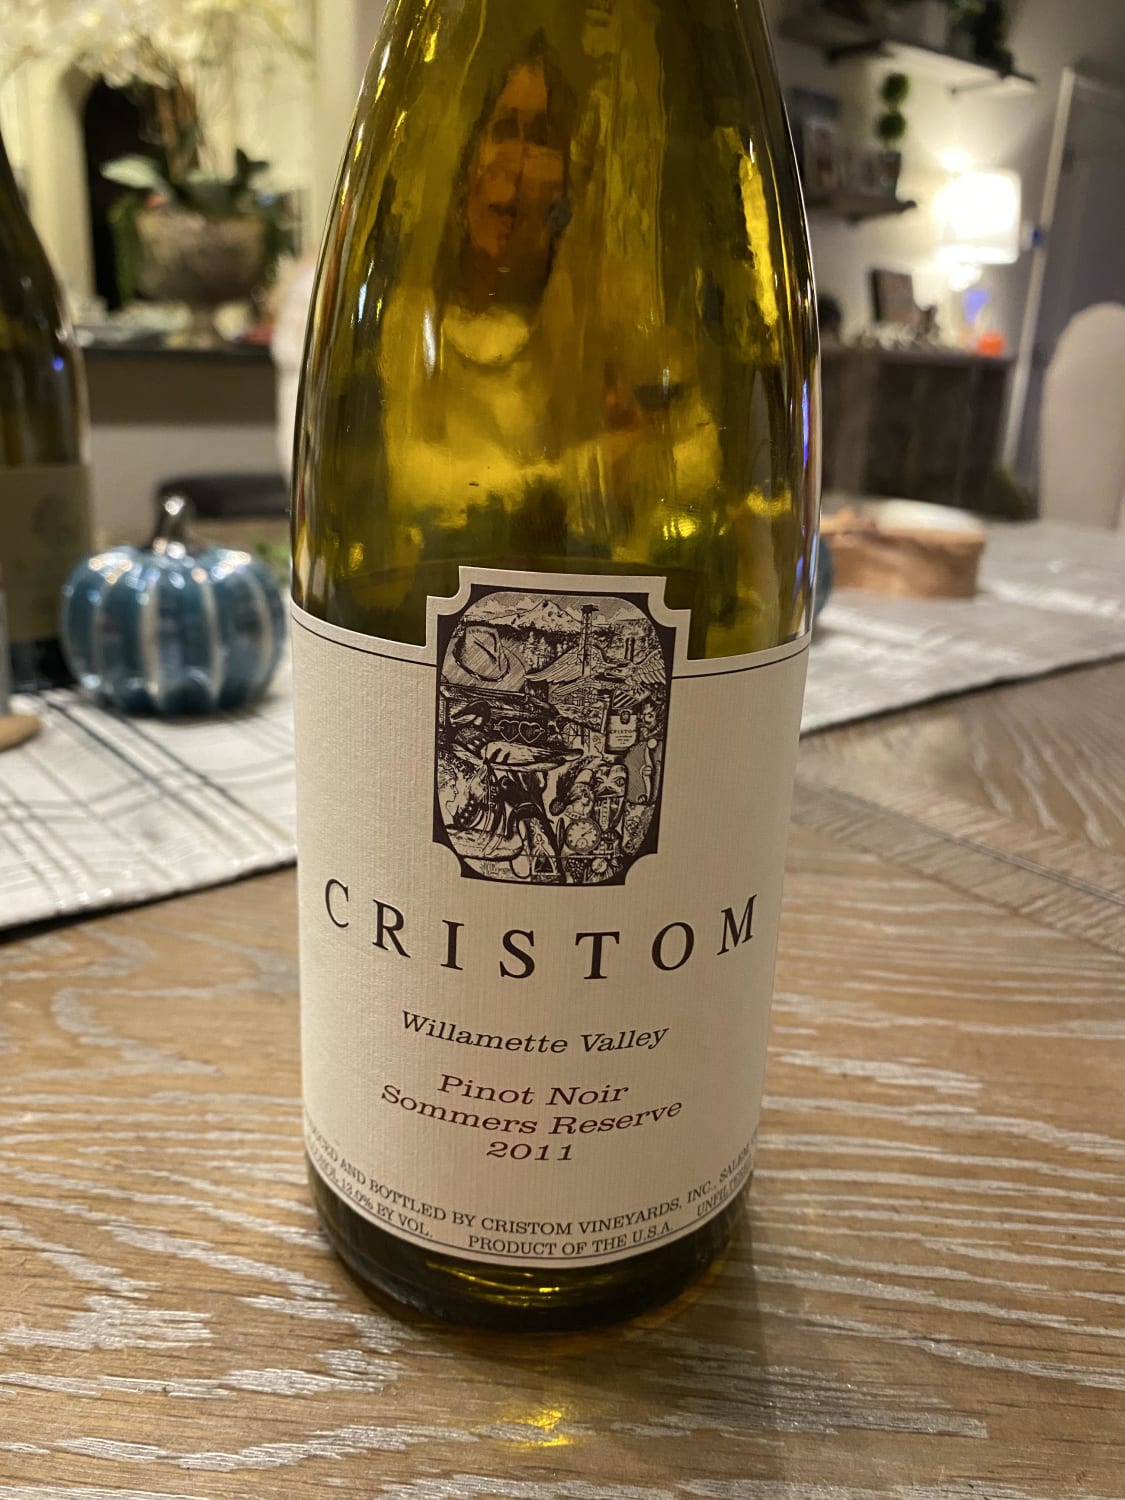 Pulled this out of the cellar tonight for my fifth anniversary with my wife- 2011 Christom Sommer Reserve Pinot